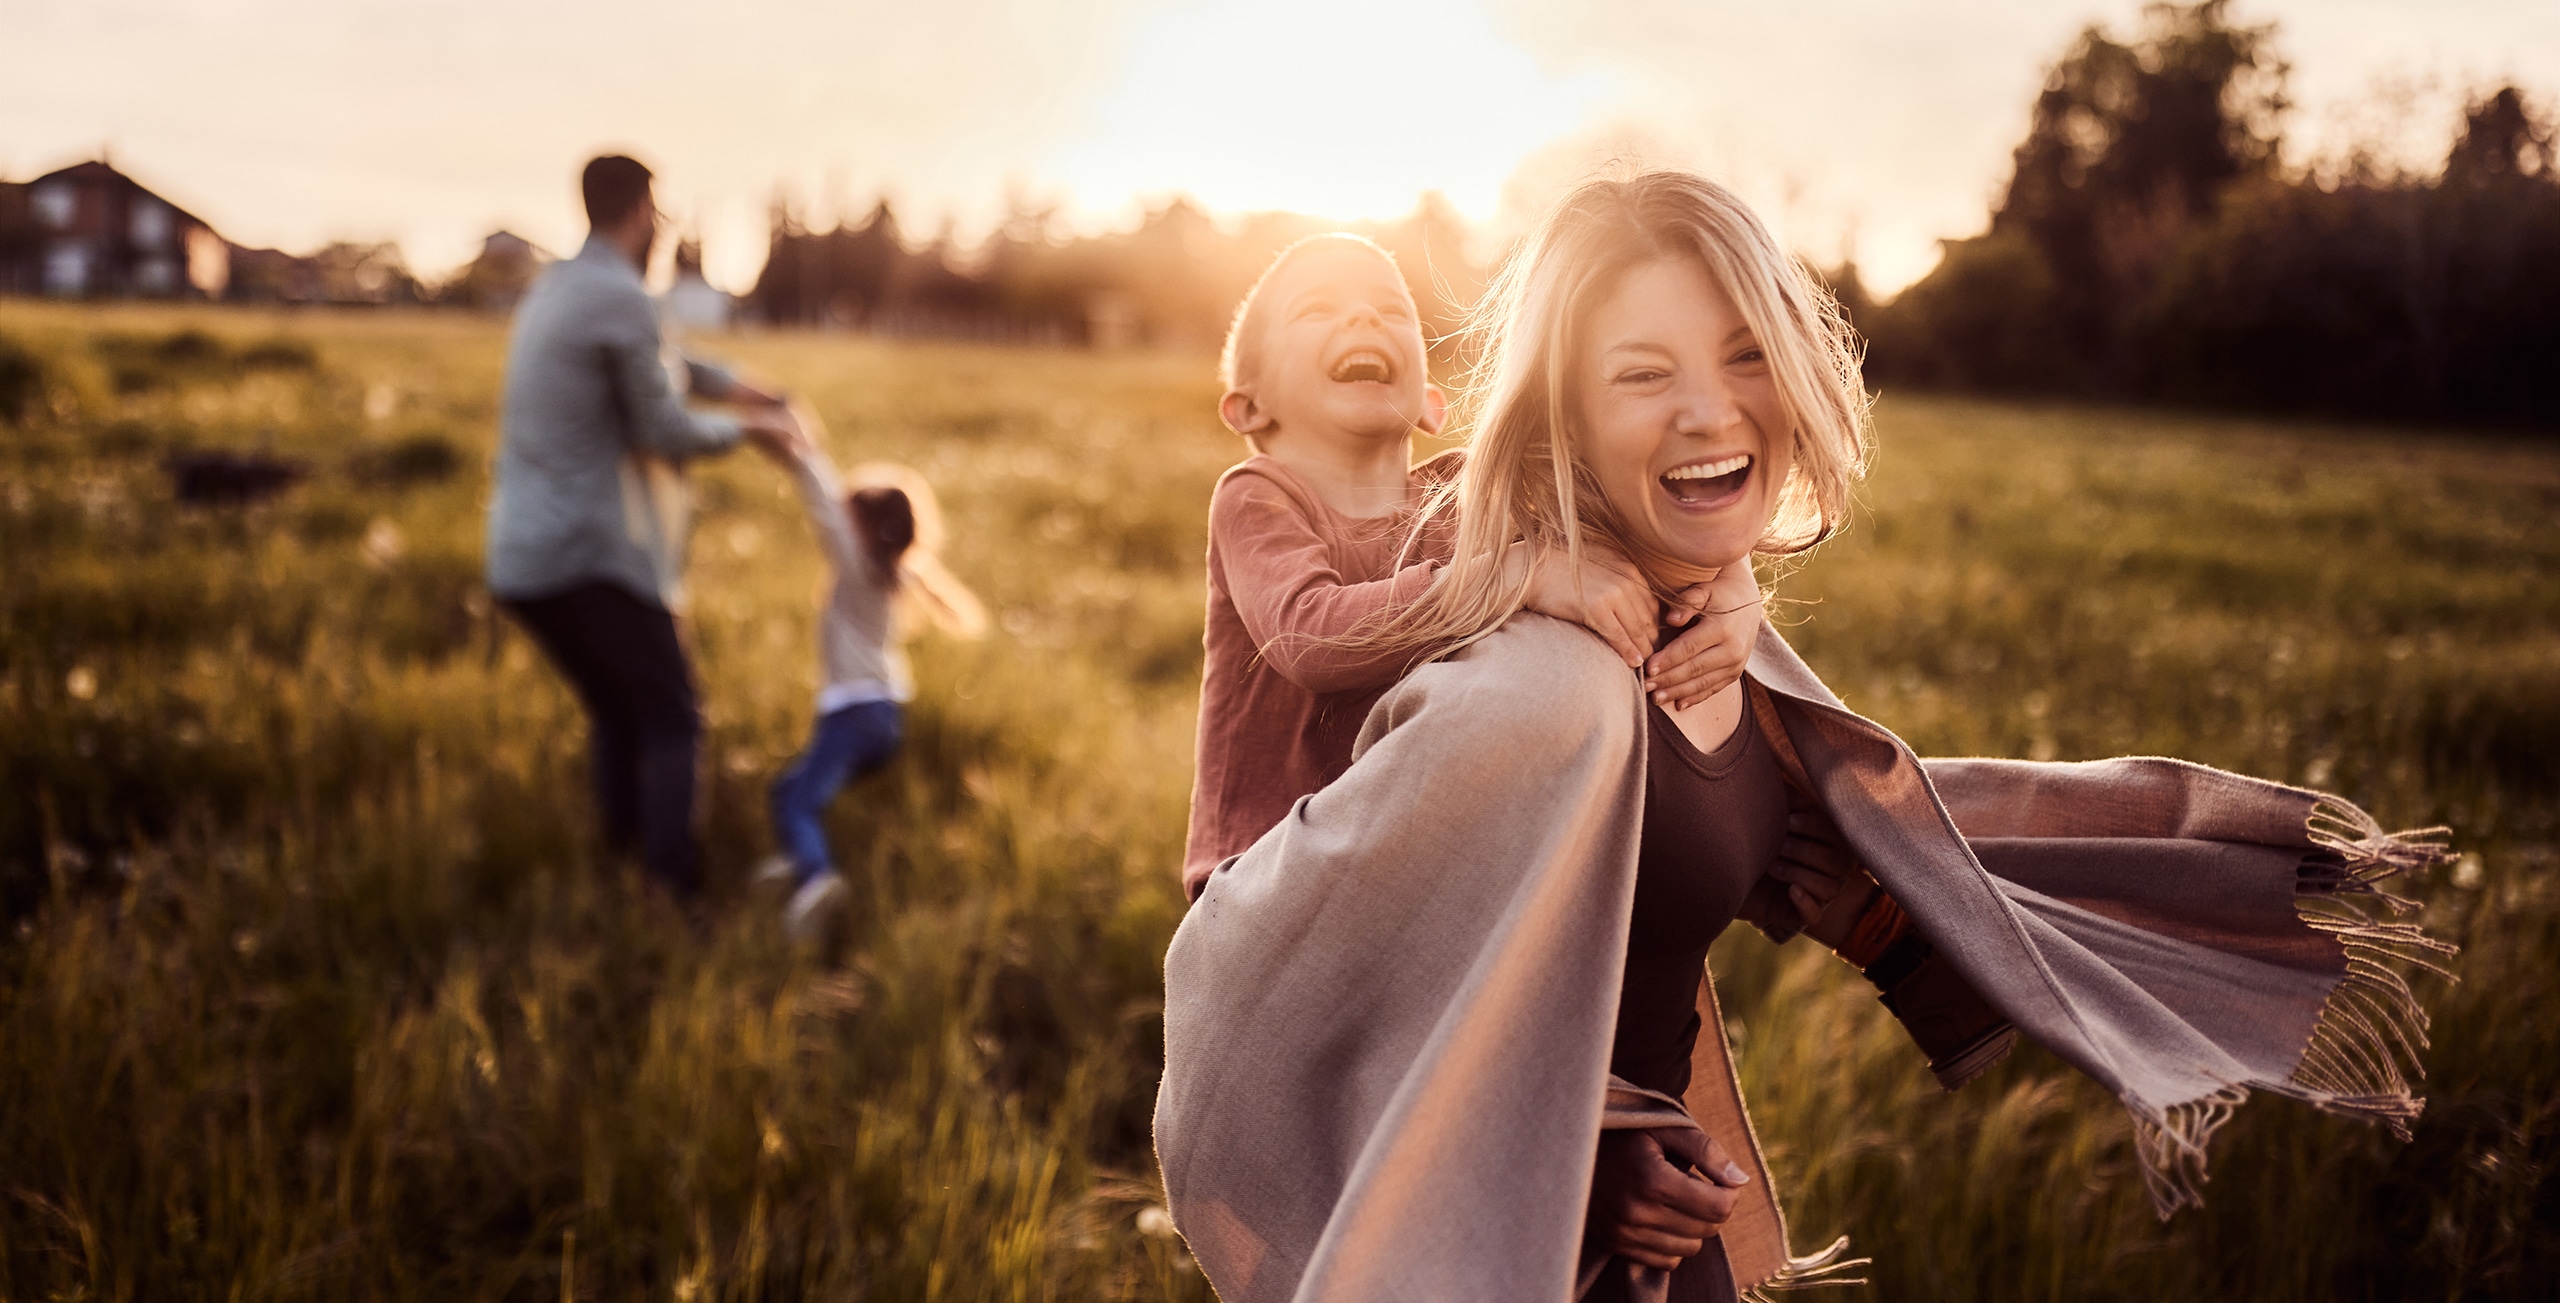 Carefree woman having fun while piggybacking her small son in the park at sunset. There are people in the background. Copy space.